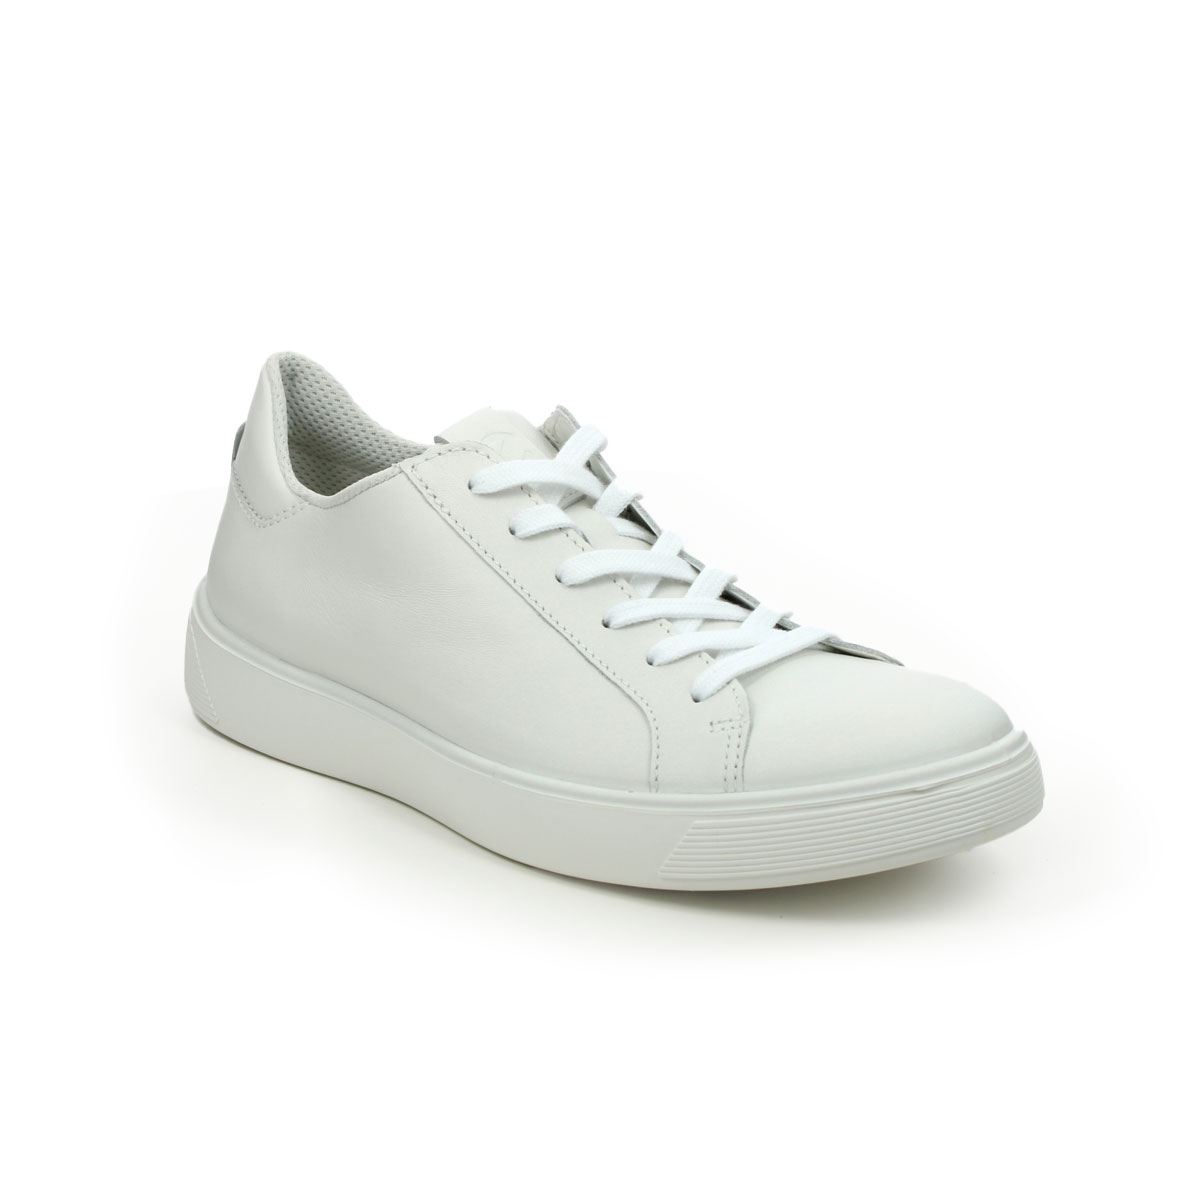 Ecco Street Tray Mens White Leather Mens Trainers 504744-01007 In Size 46 In Plain White Leather